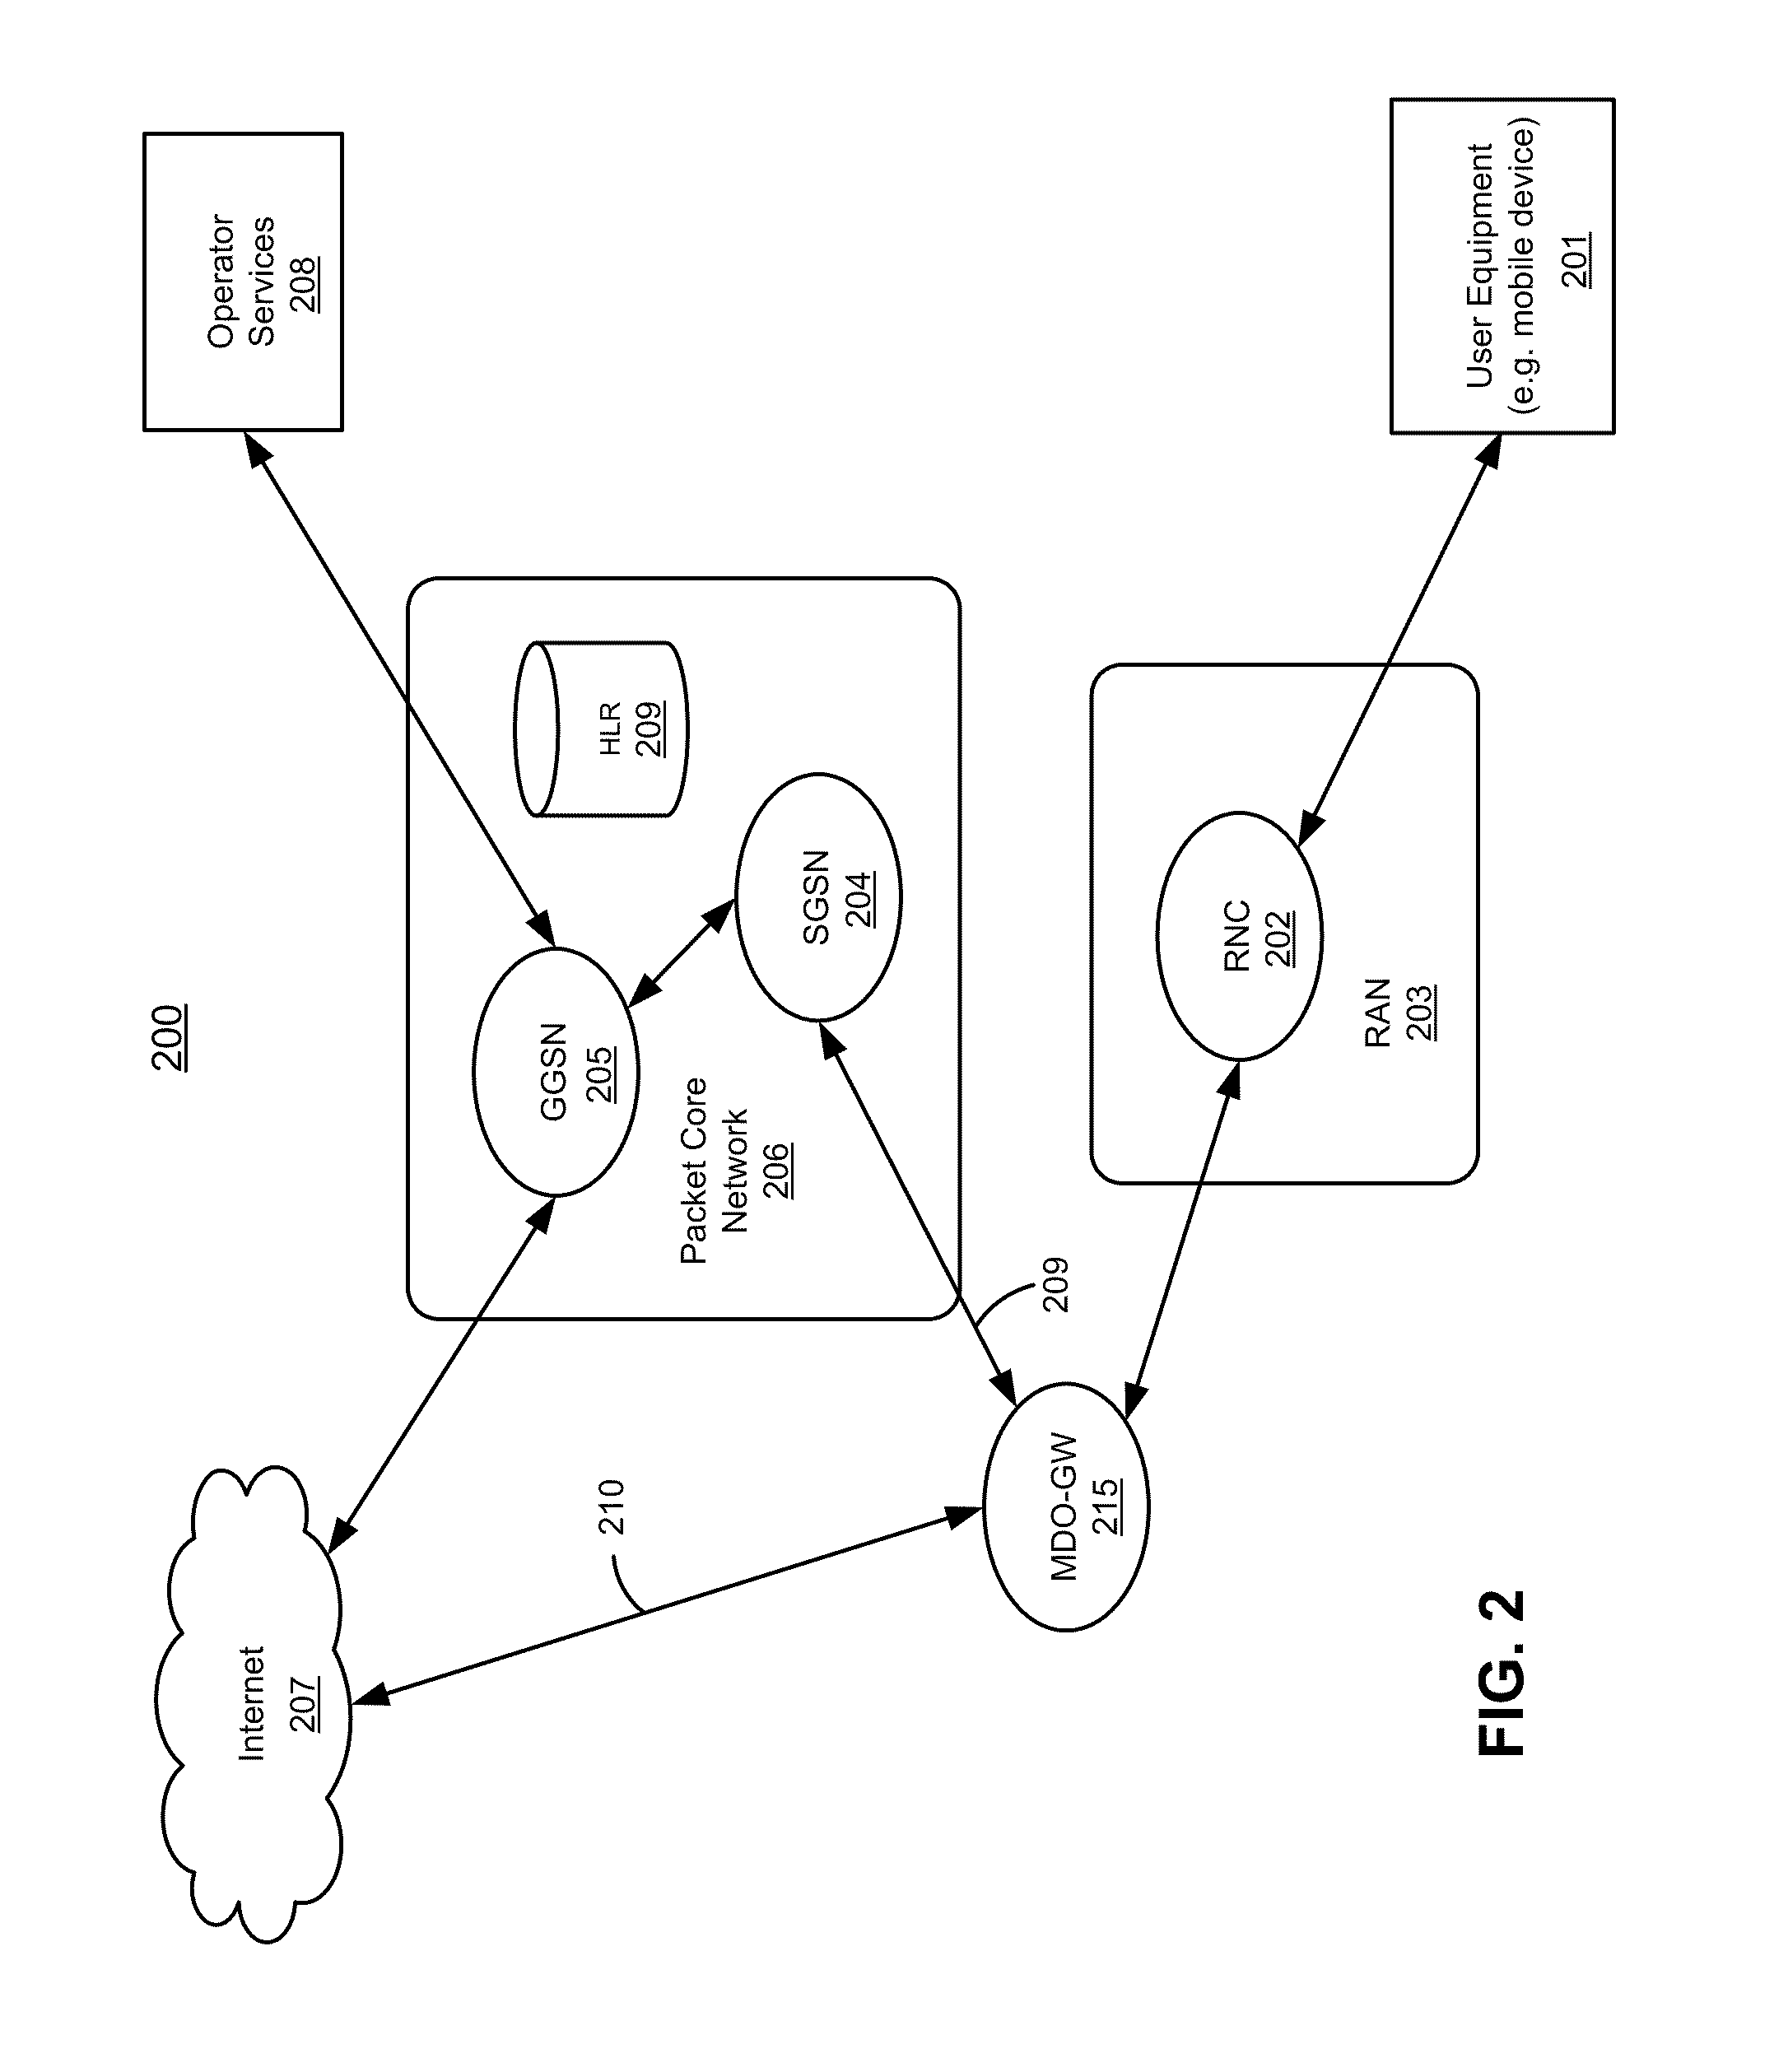 Method and system for selectively bypassing packet core network within a session based on traffic type